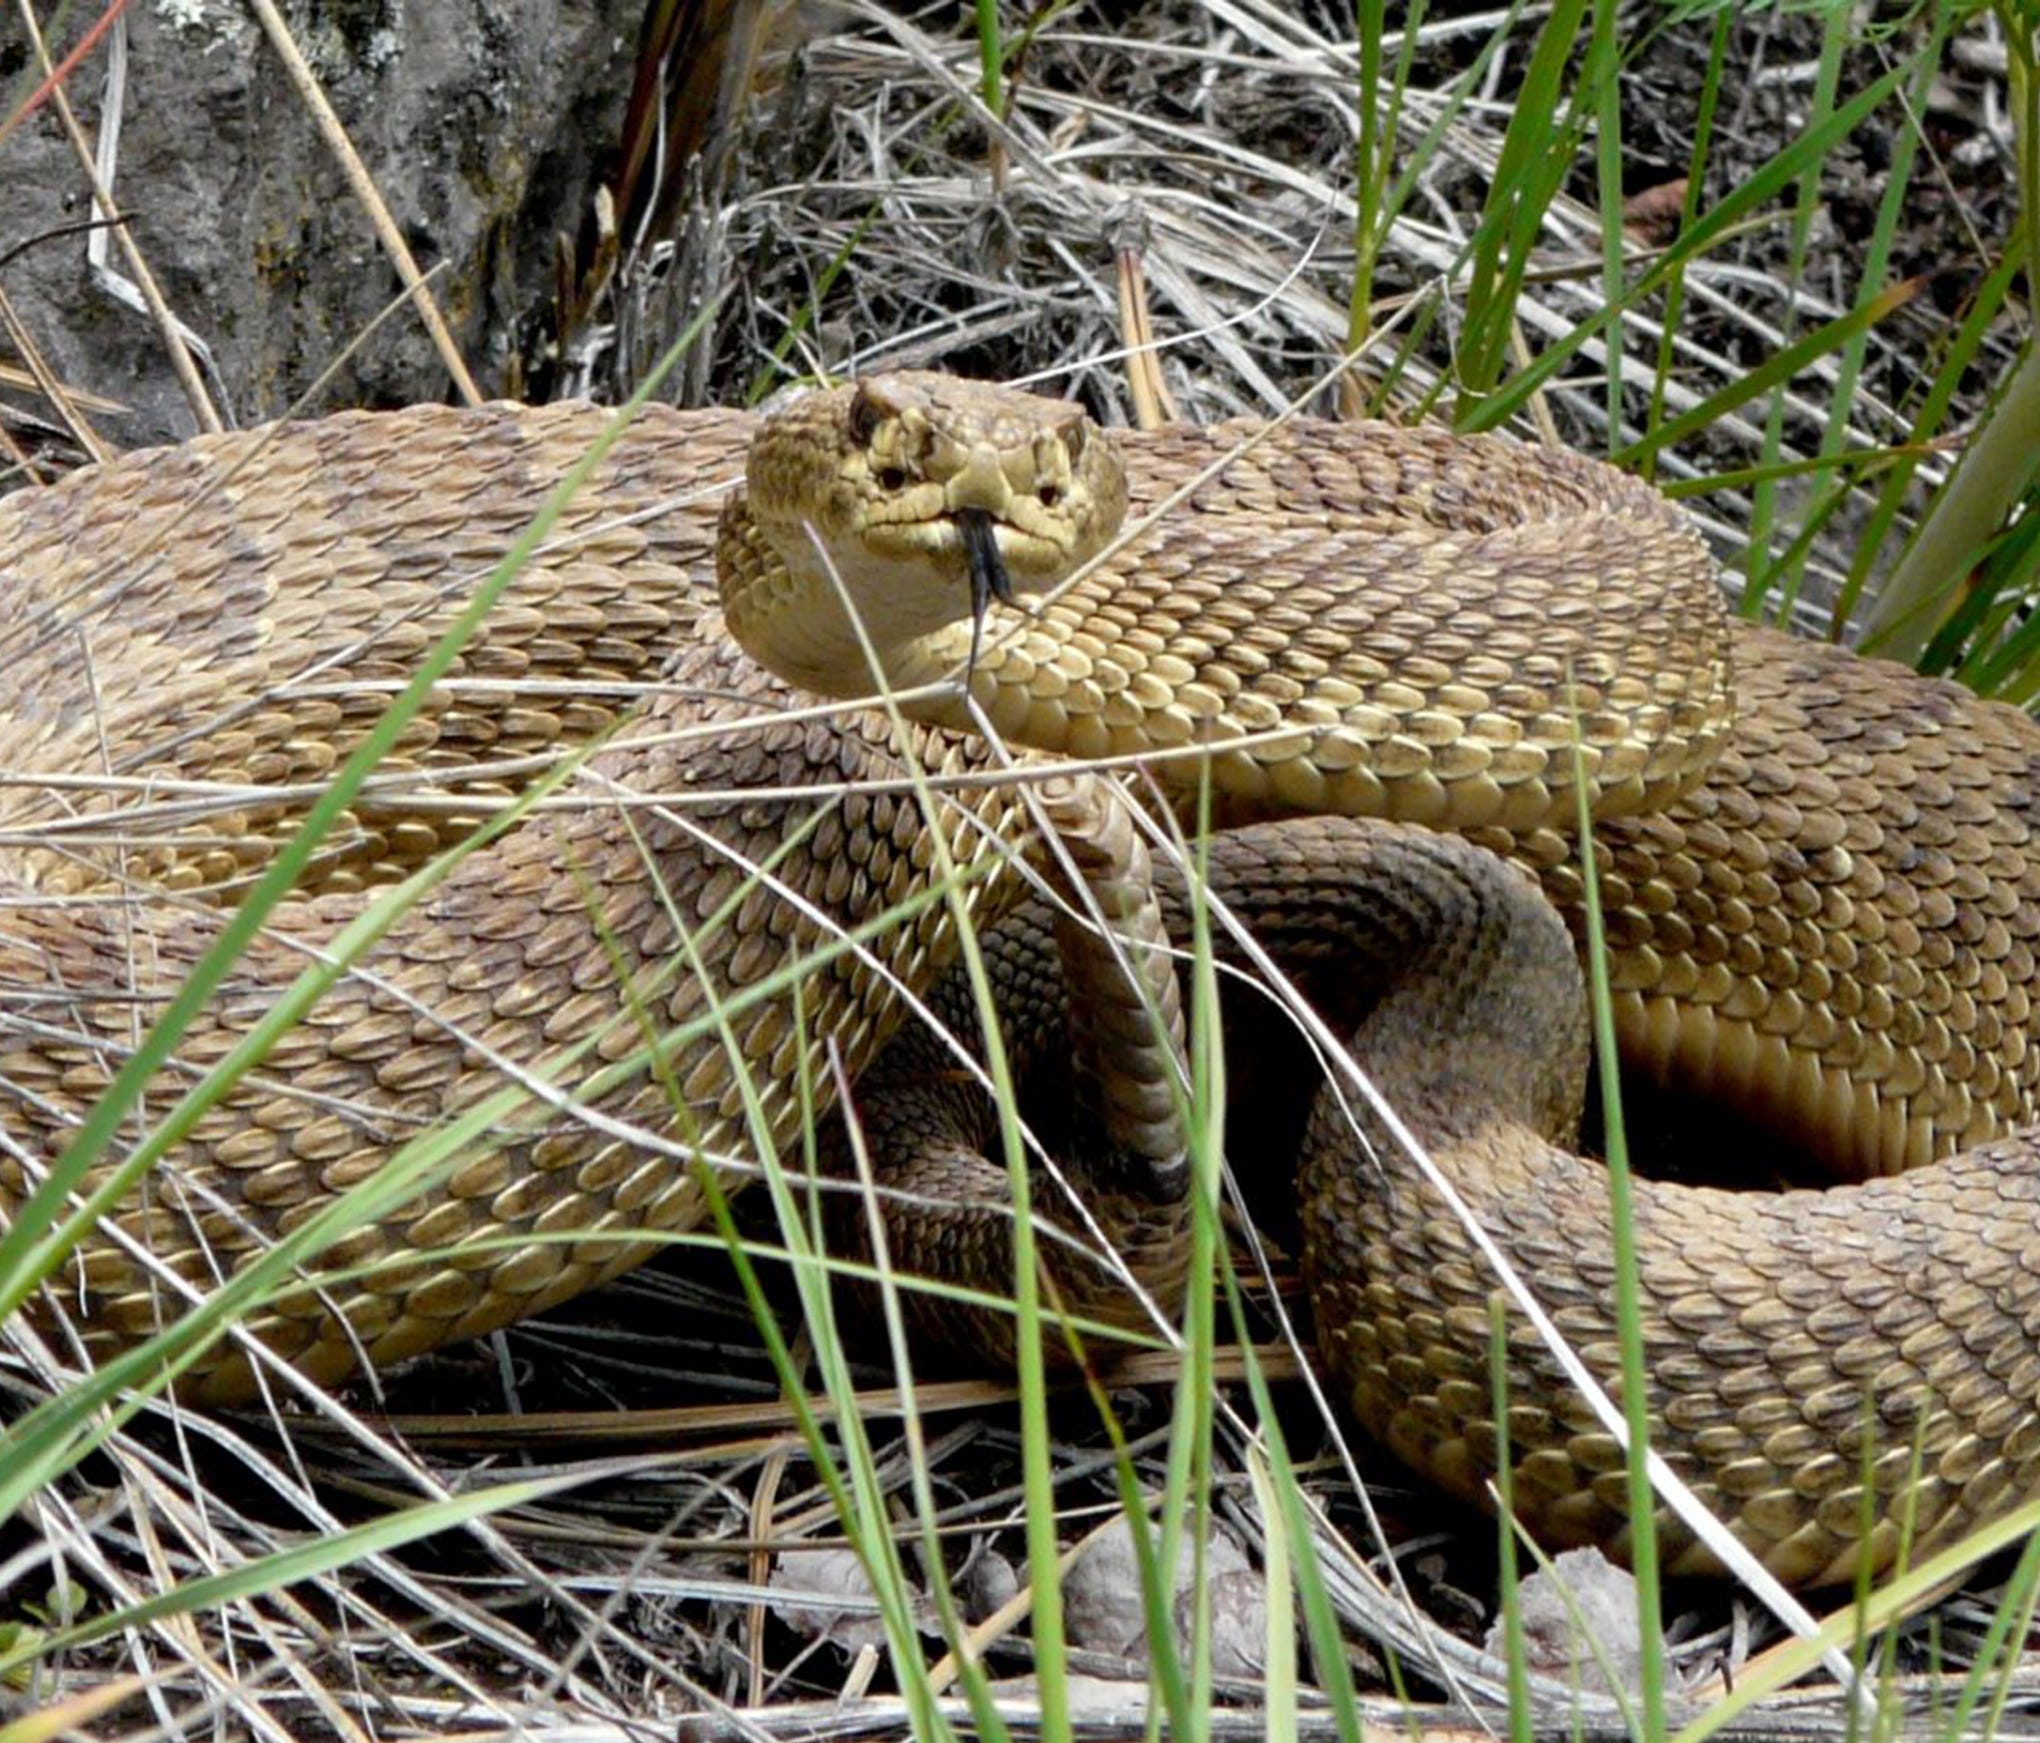 This prairie rattlesnake, its rattle to the right below its head, was spotted in the east Missoula area of Montana.